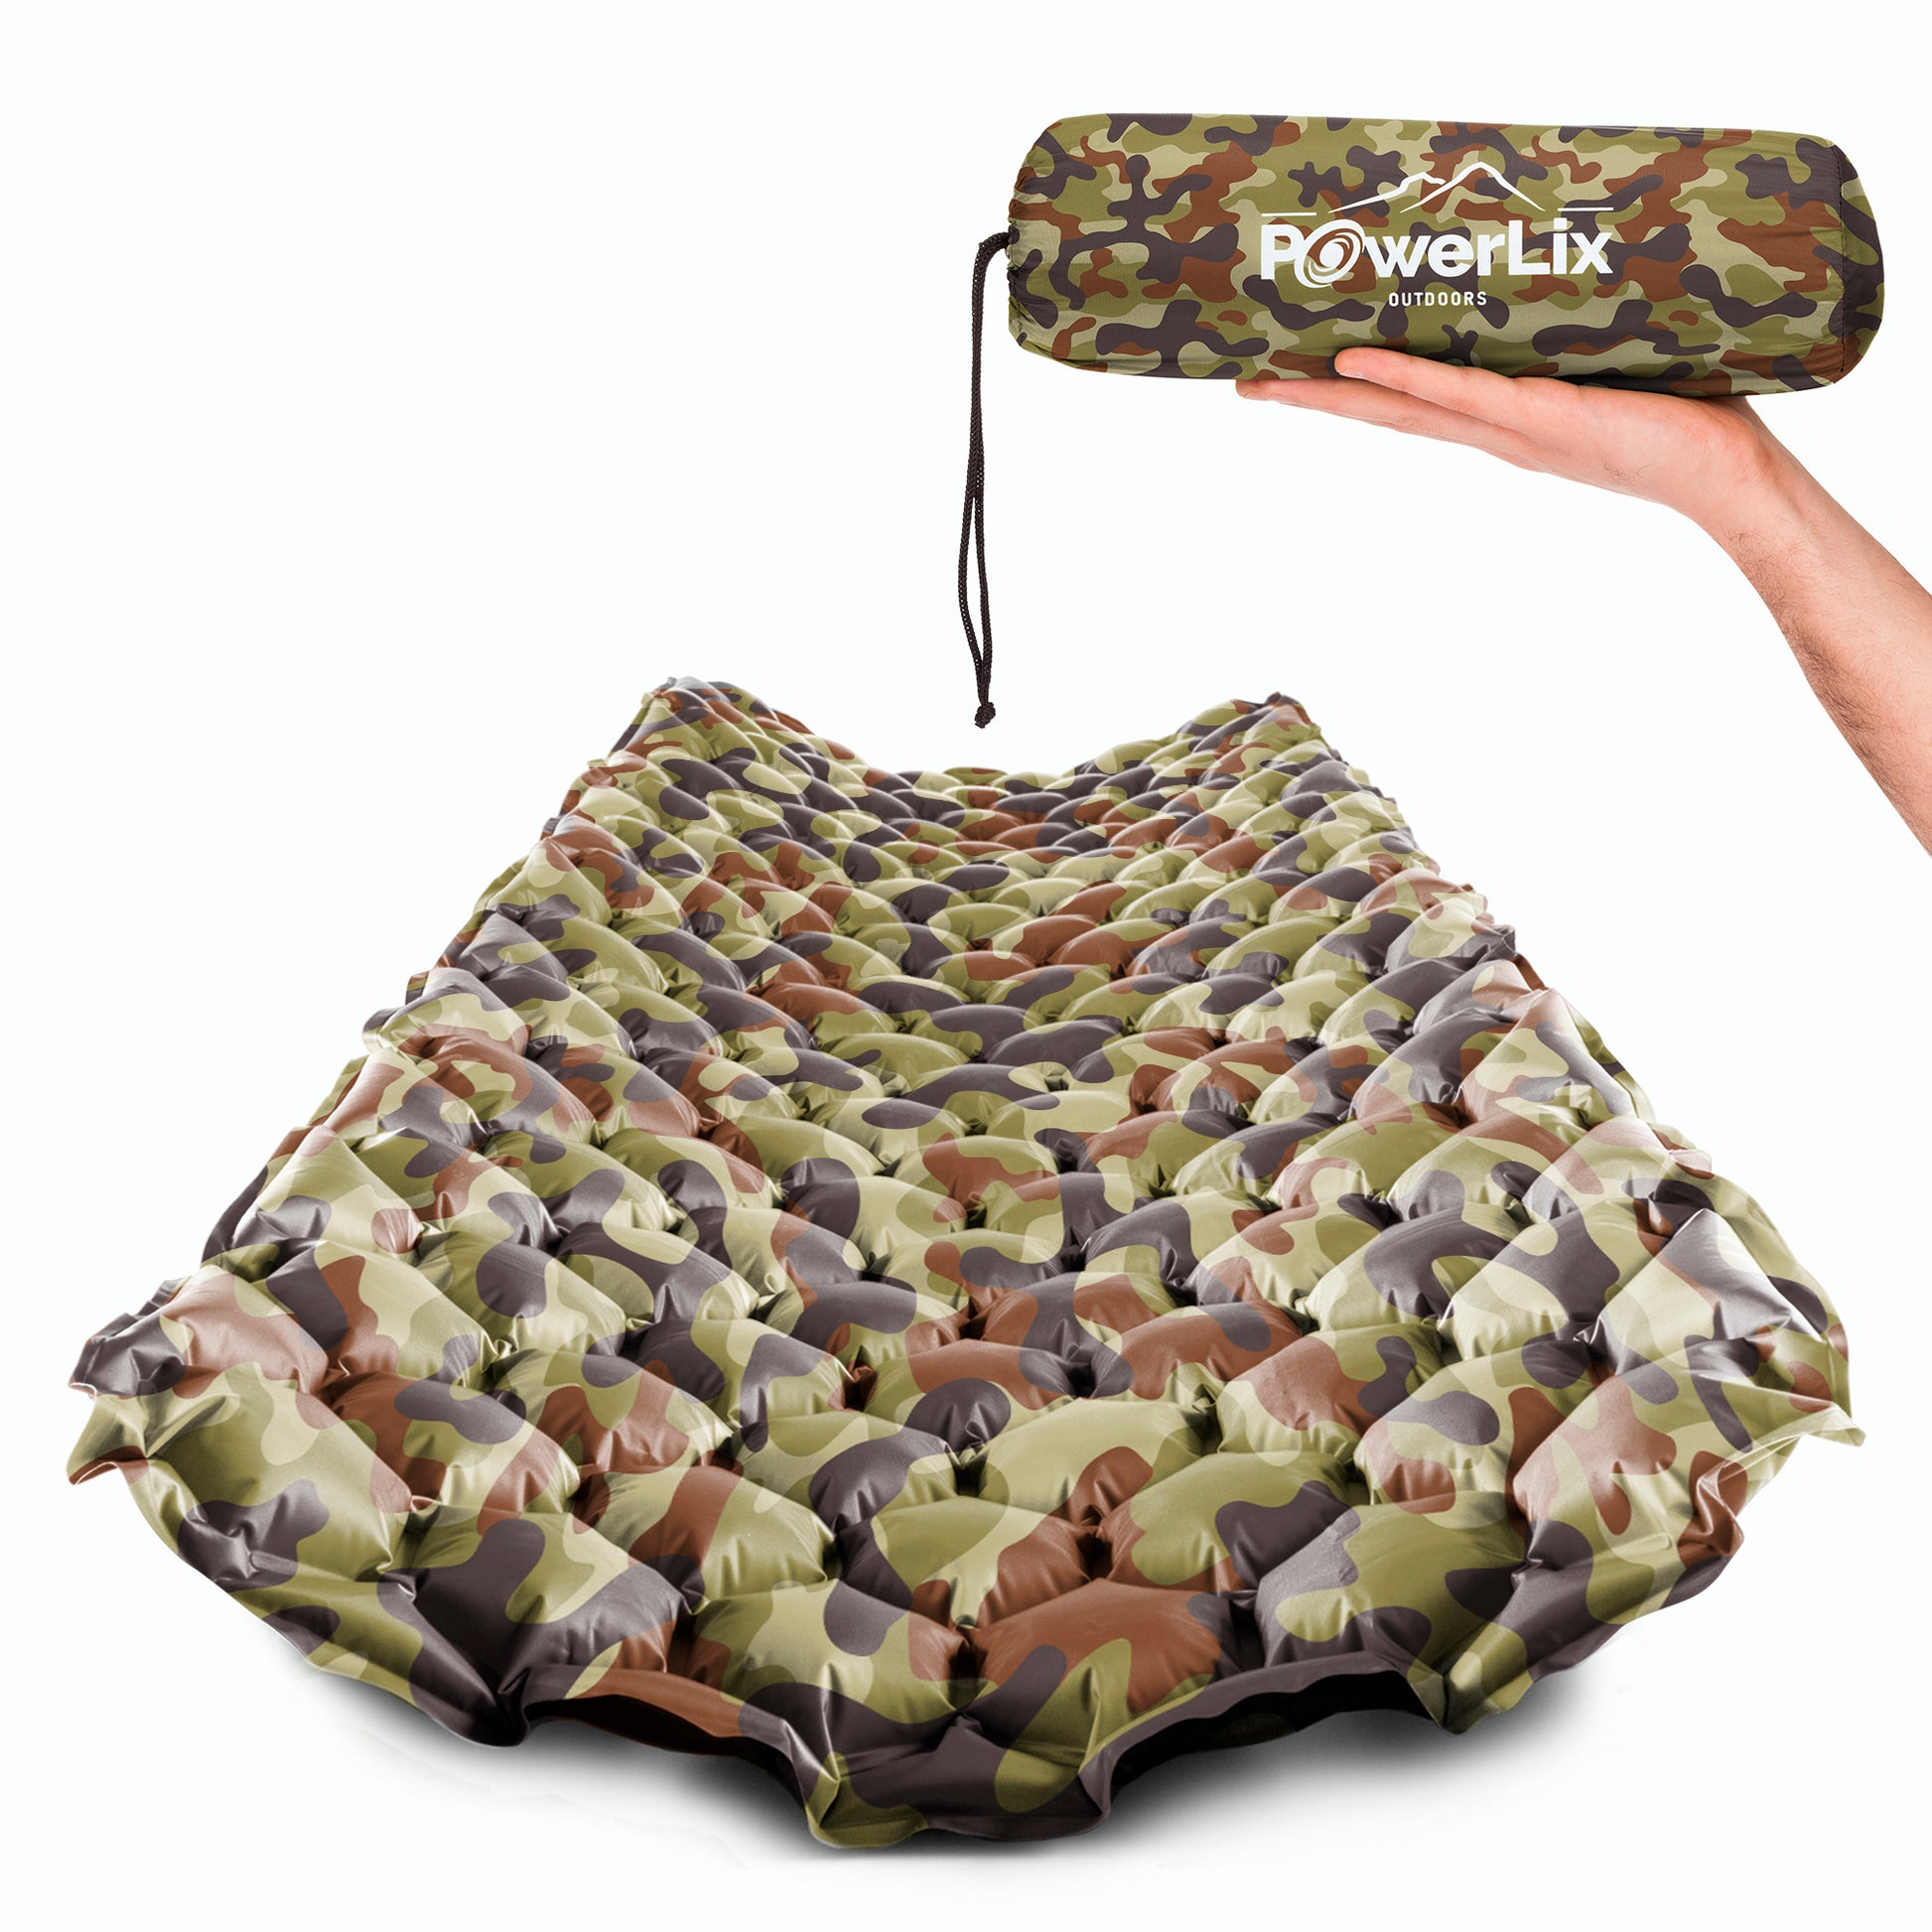 Green camouflage inflated sleeping pad, also show stored in the Powerlix Outdoors bag, held by a hand.